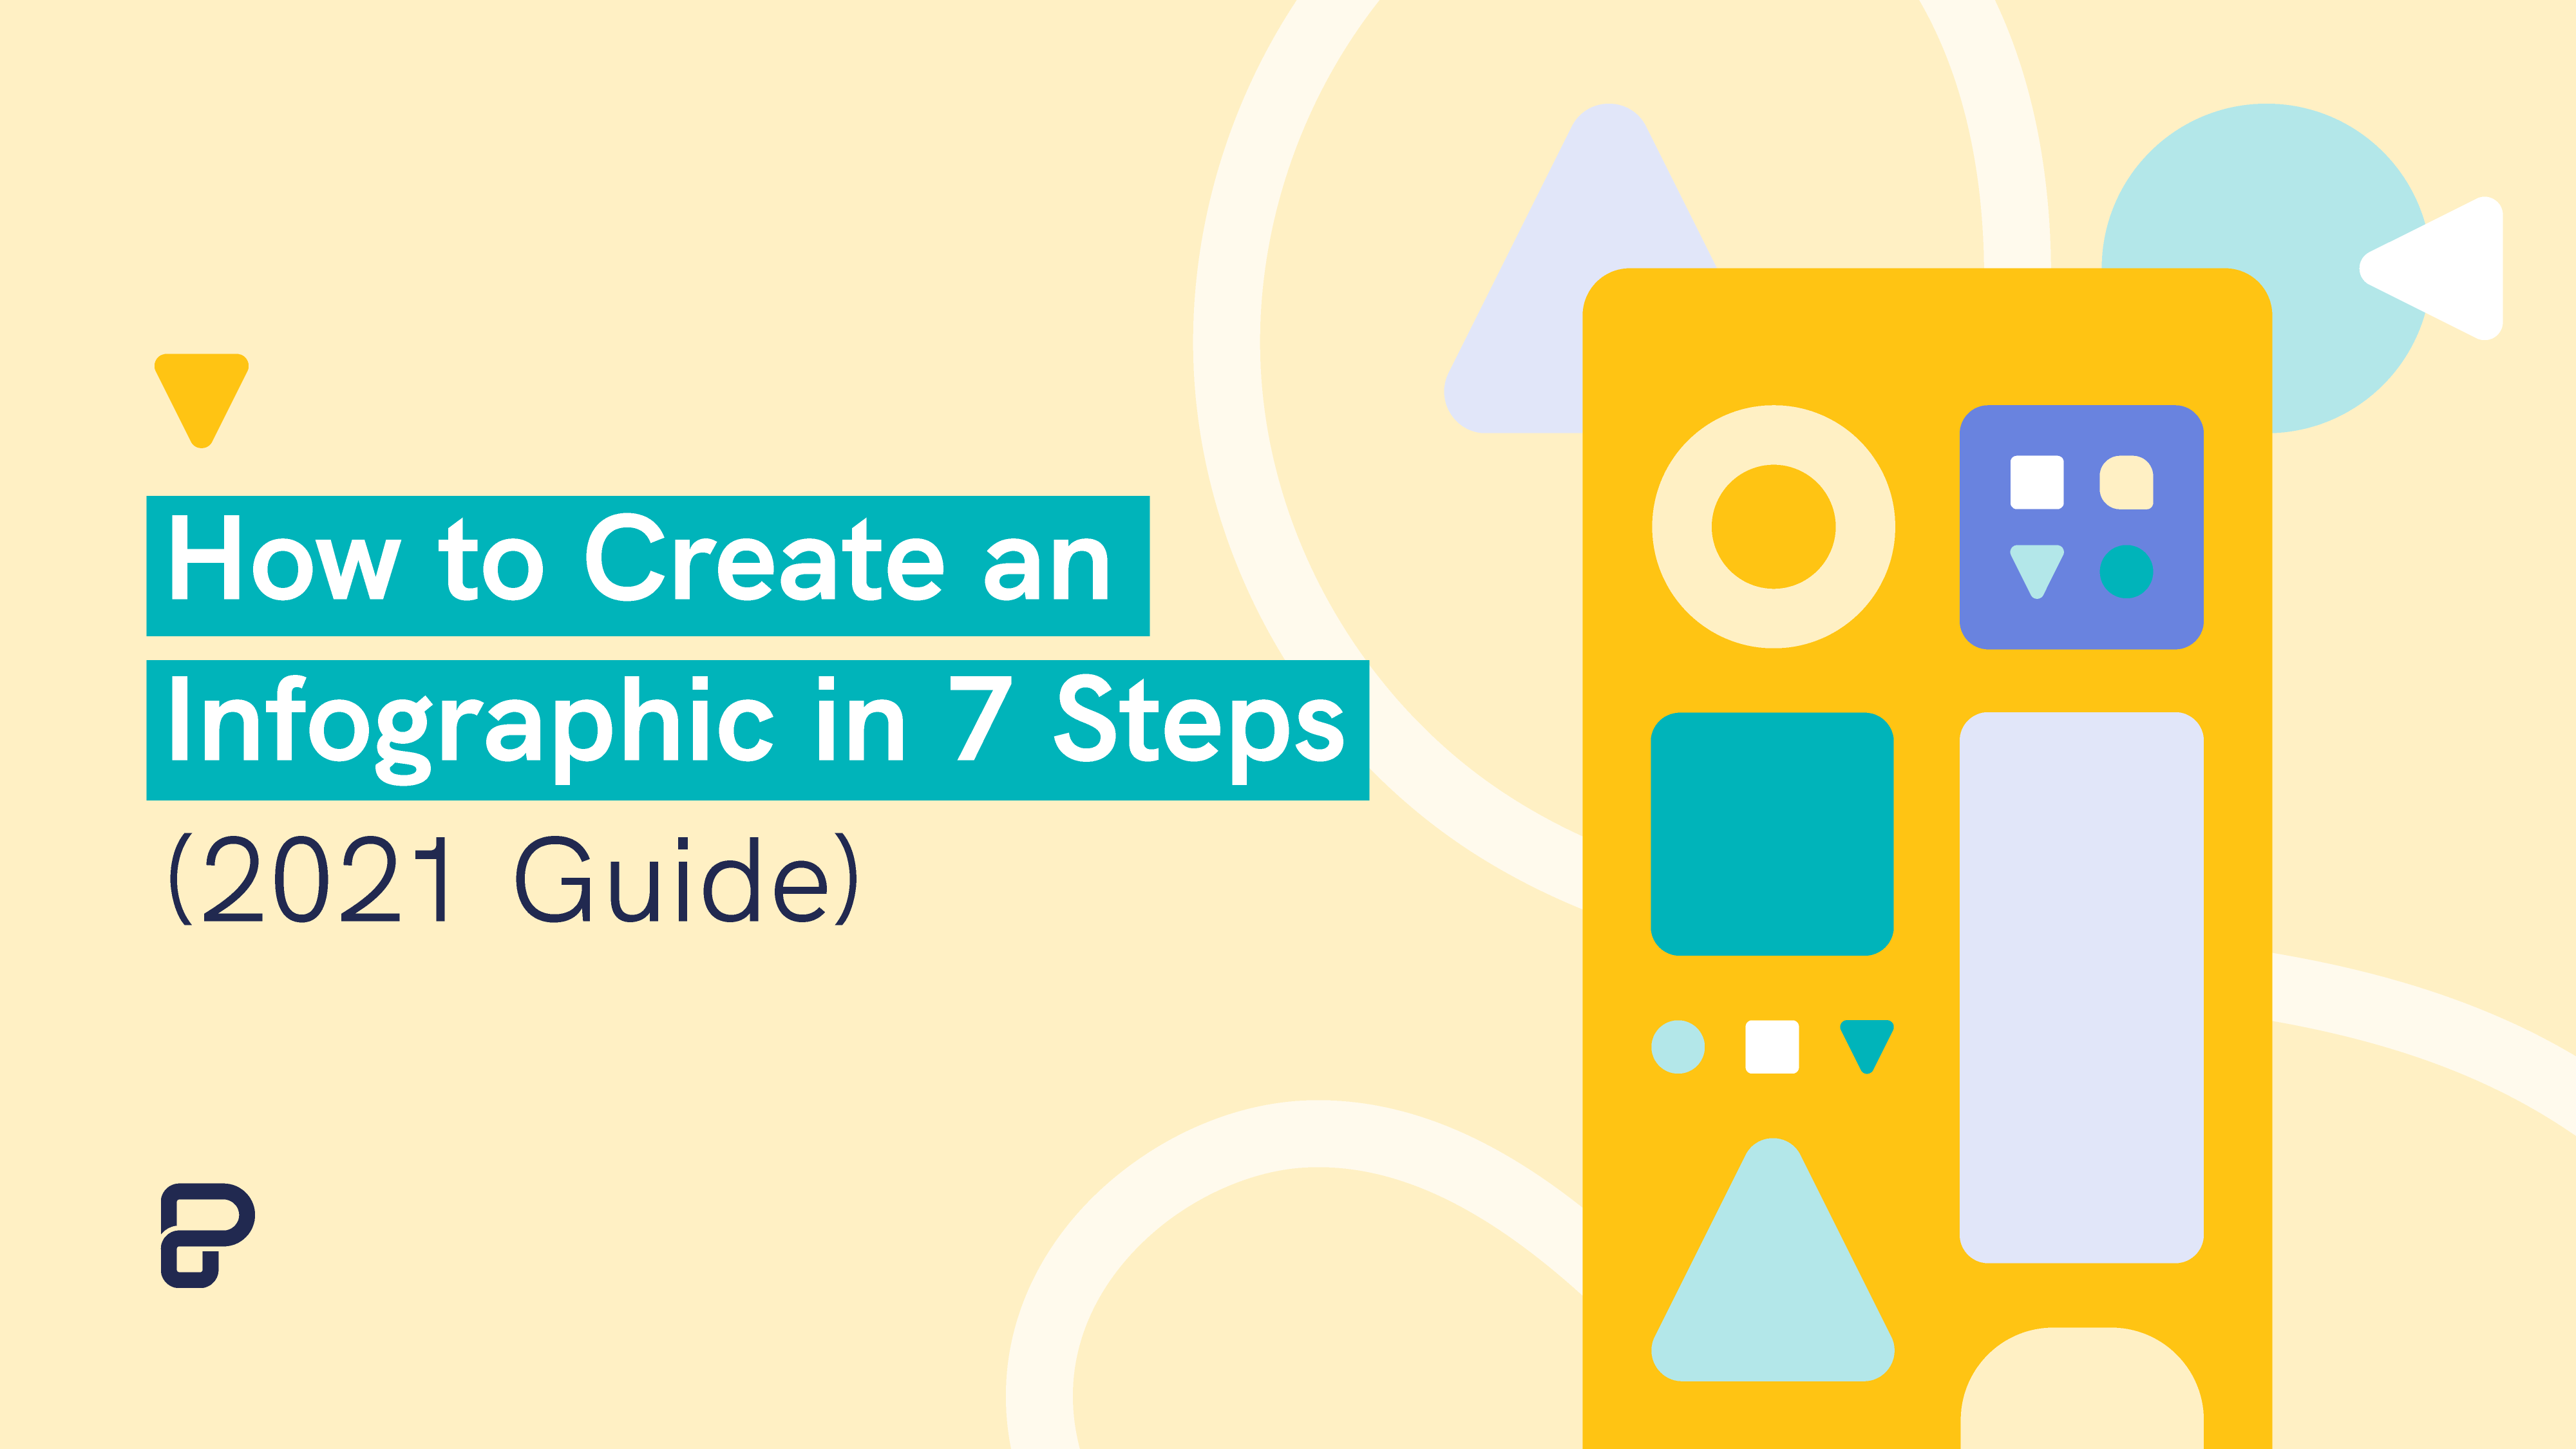 how to create an infographic in 30 minutes, guide to create infographic 2021